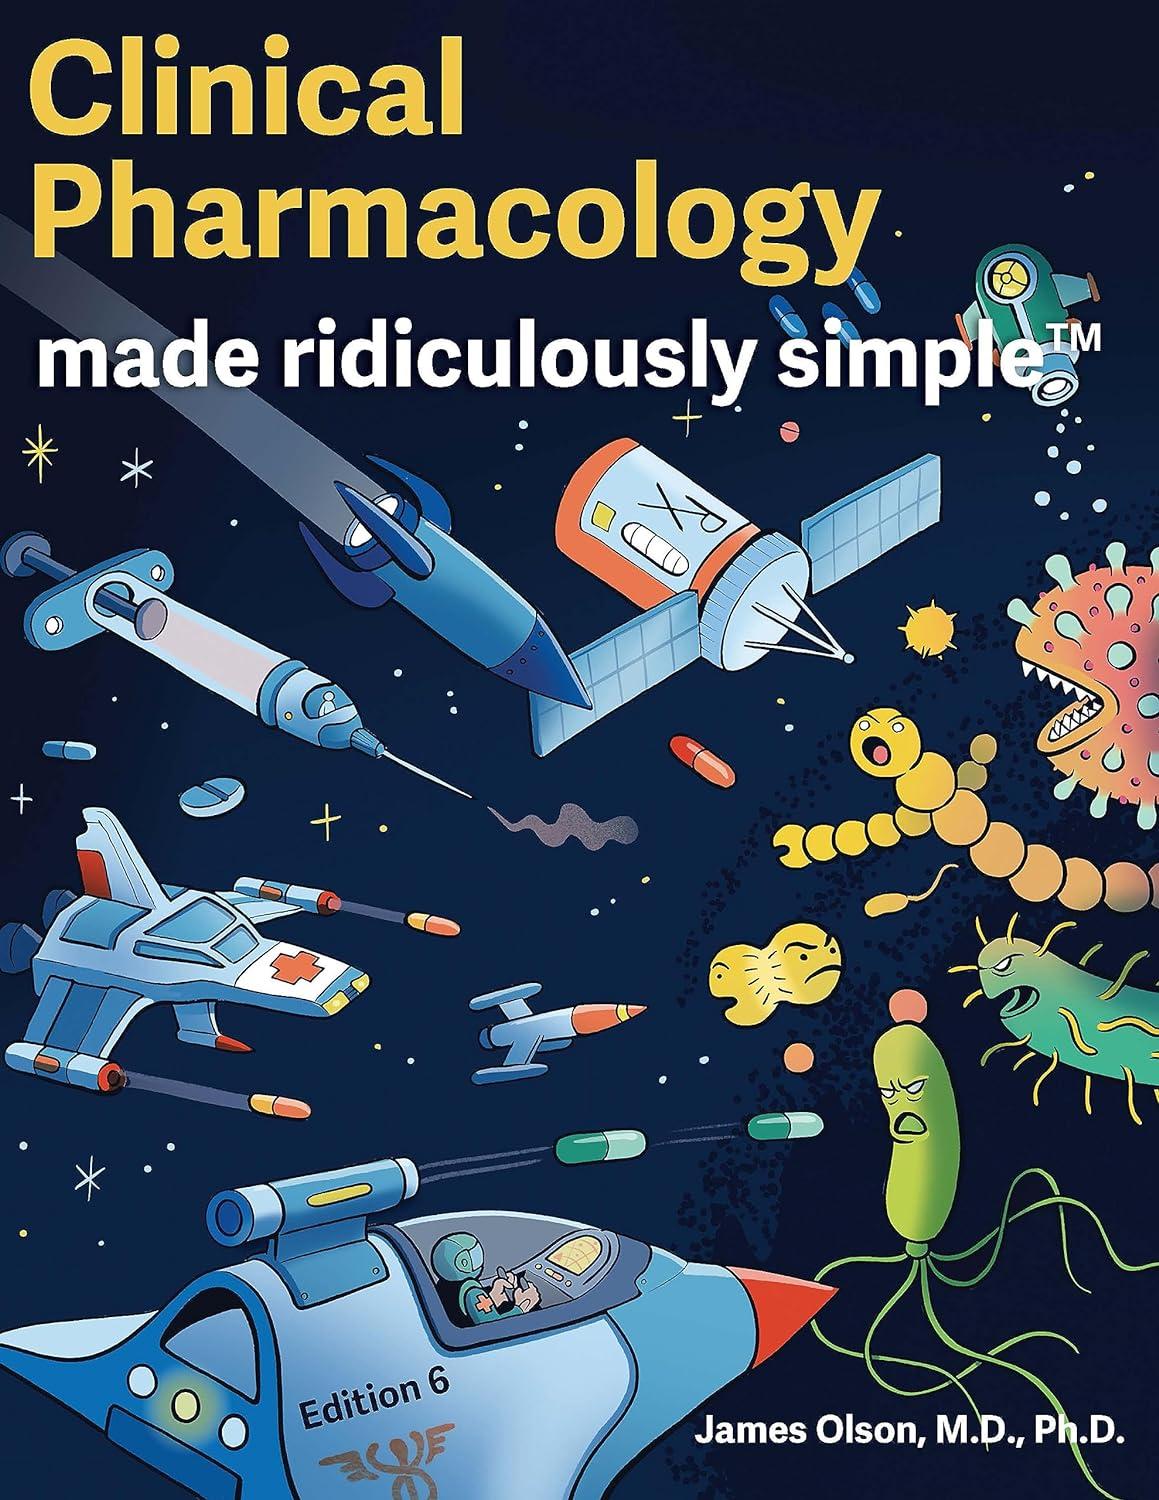 clinical pharmacology made ridiculously simple 6th edition james olson 1935660705, 978-1935660705